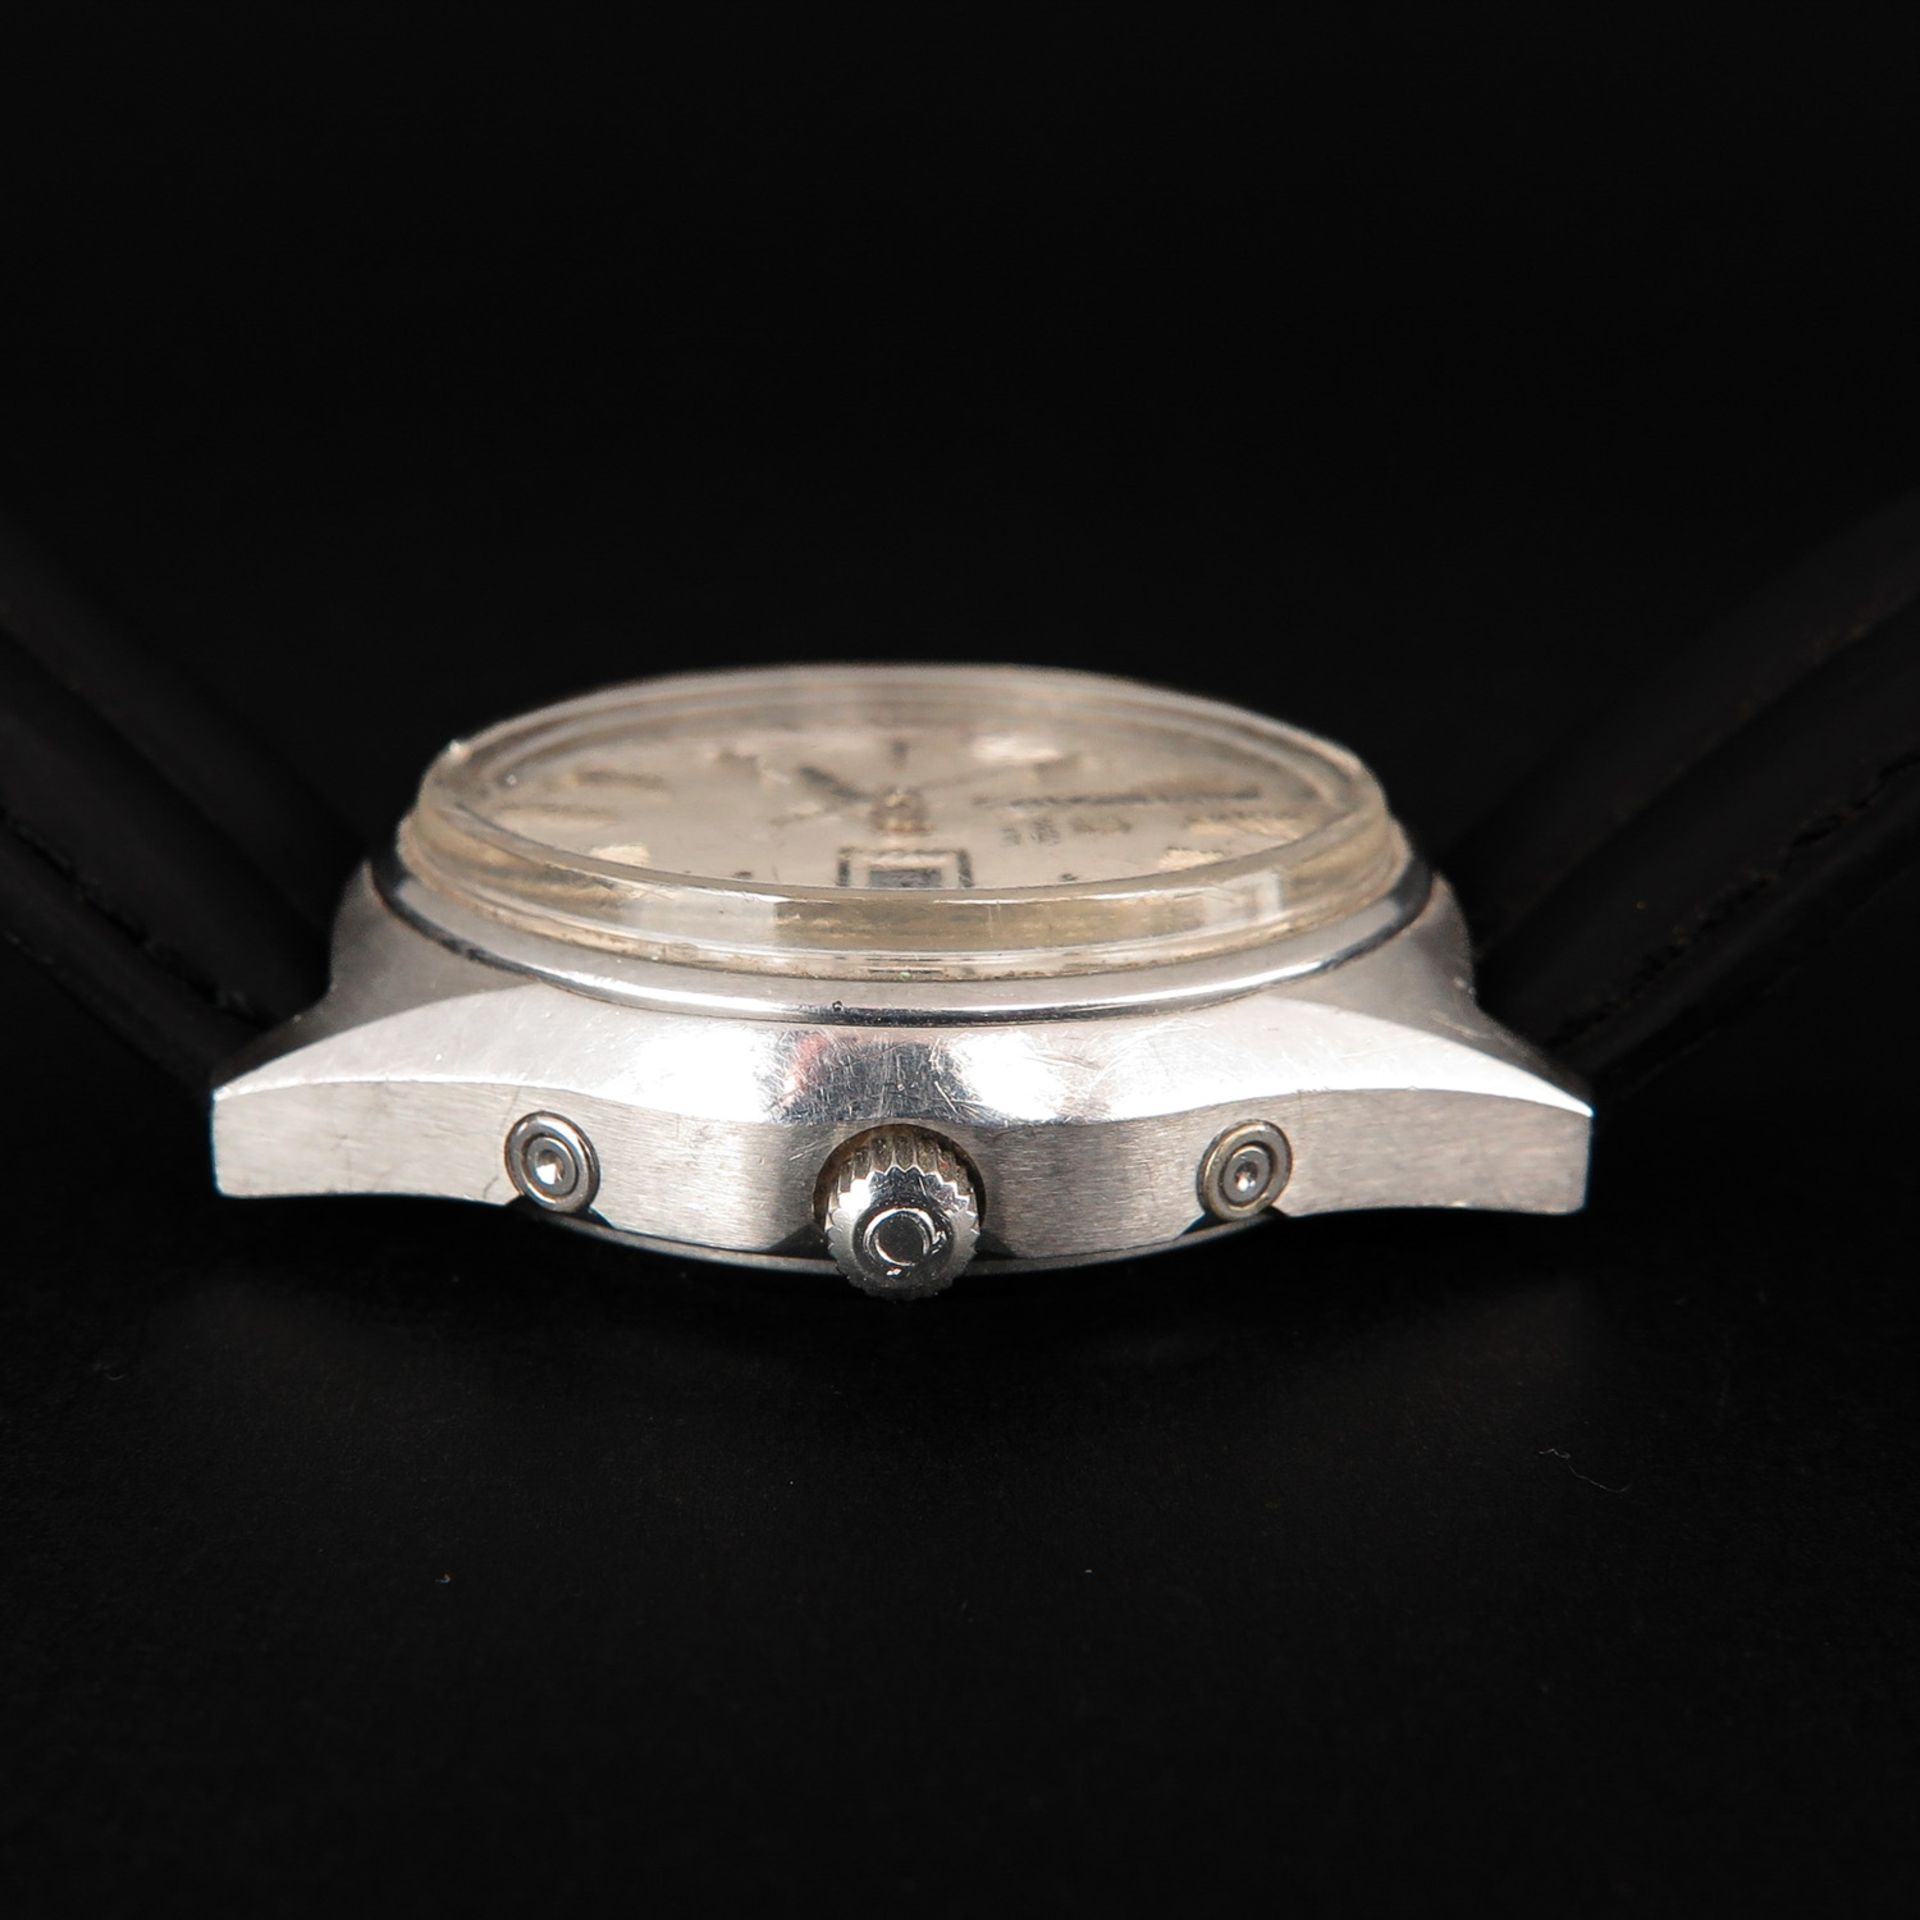 A Mens Omega Watch - Image 5 of 5